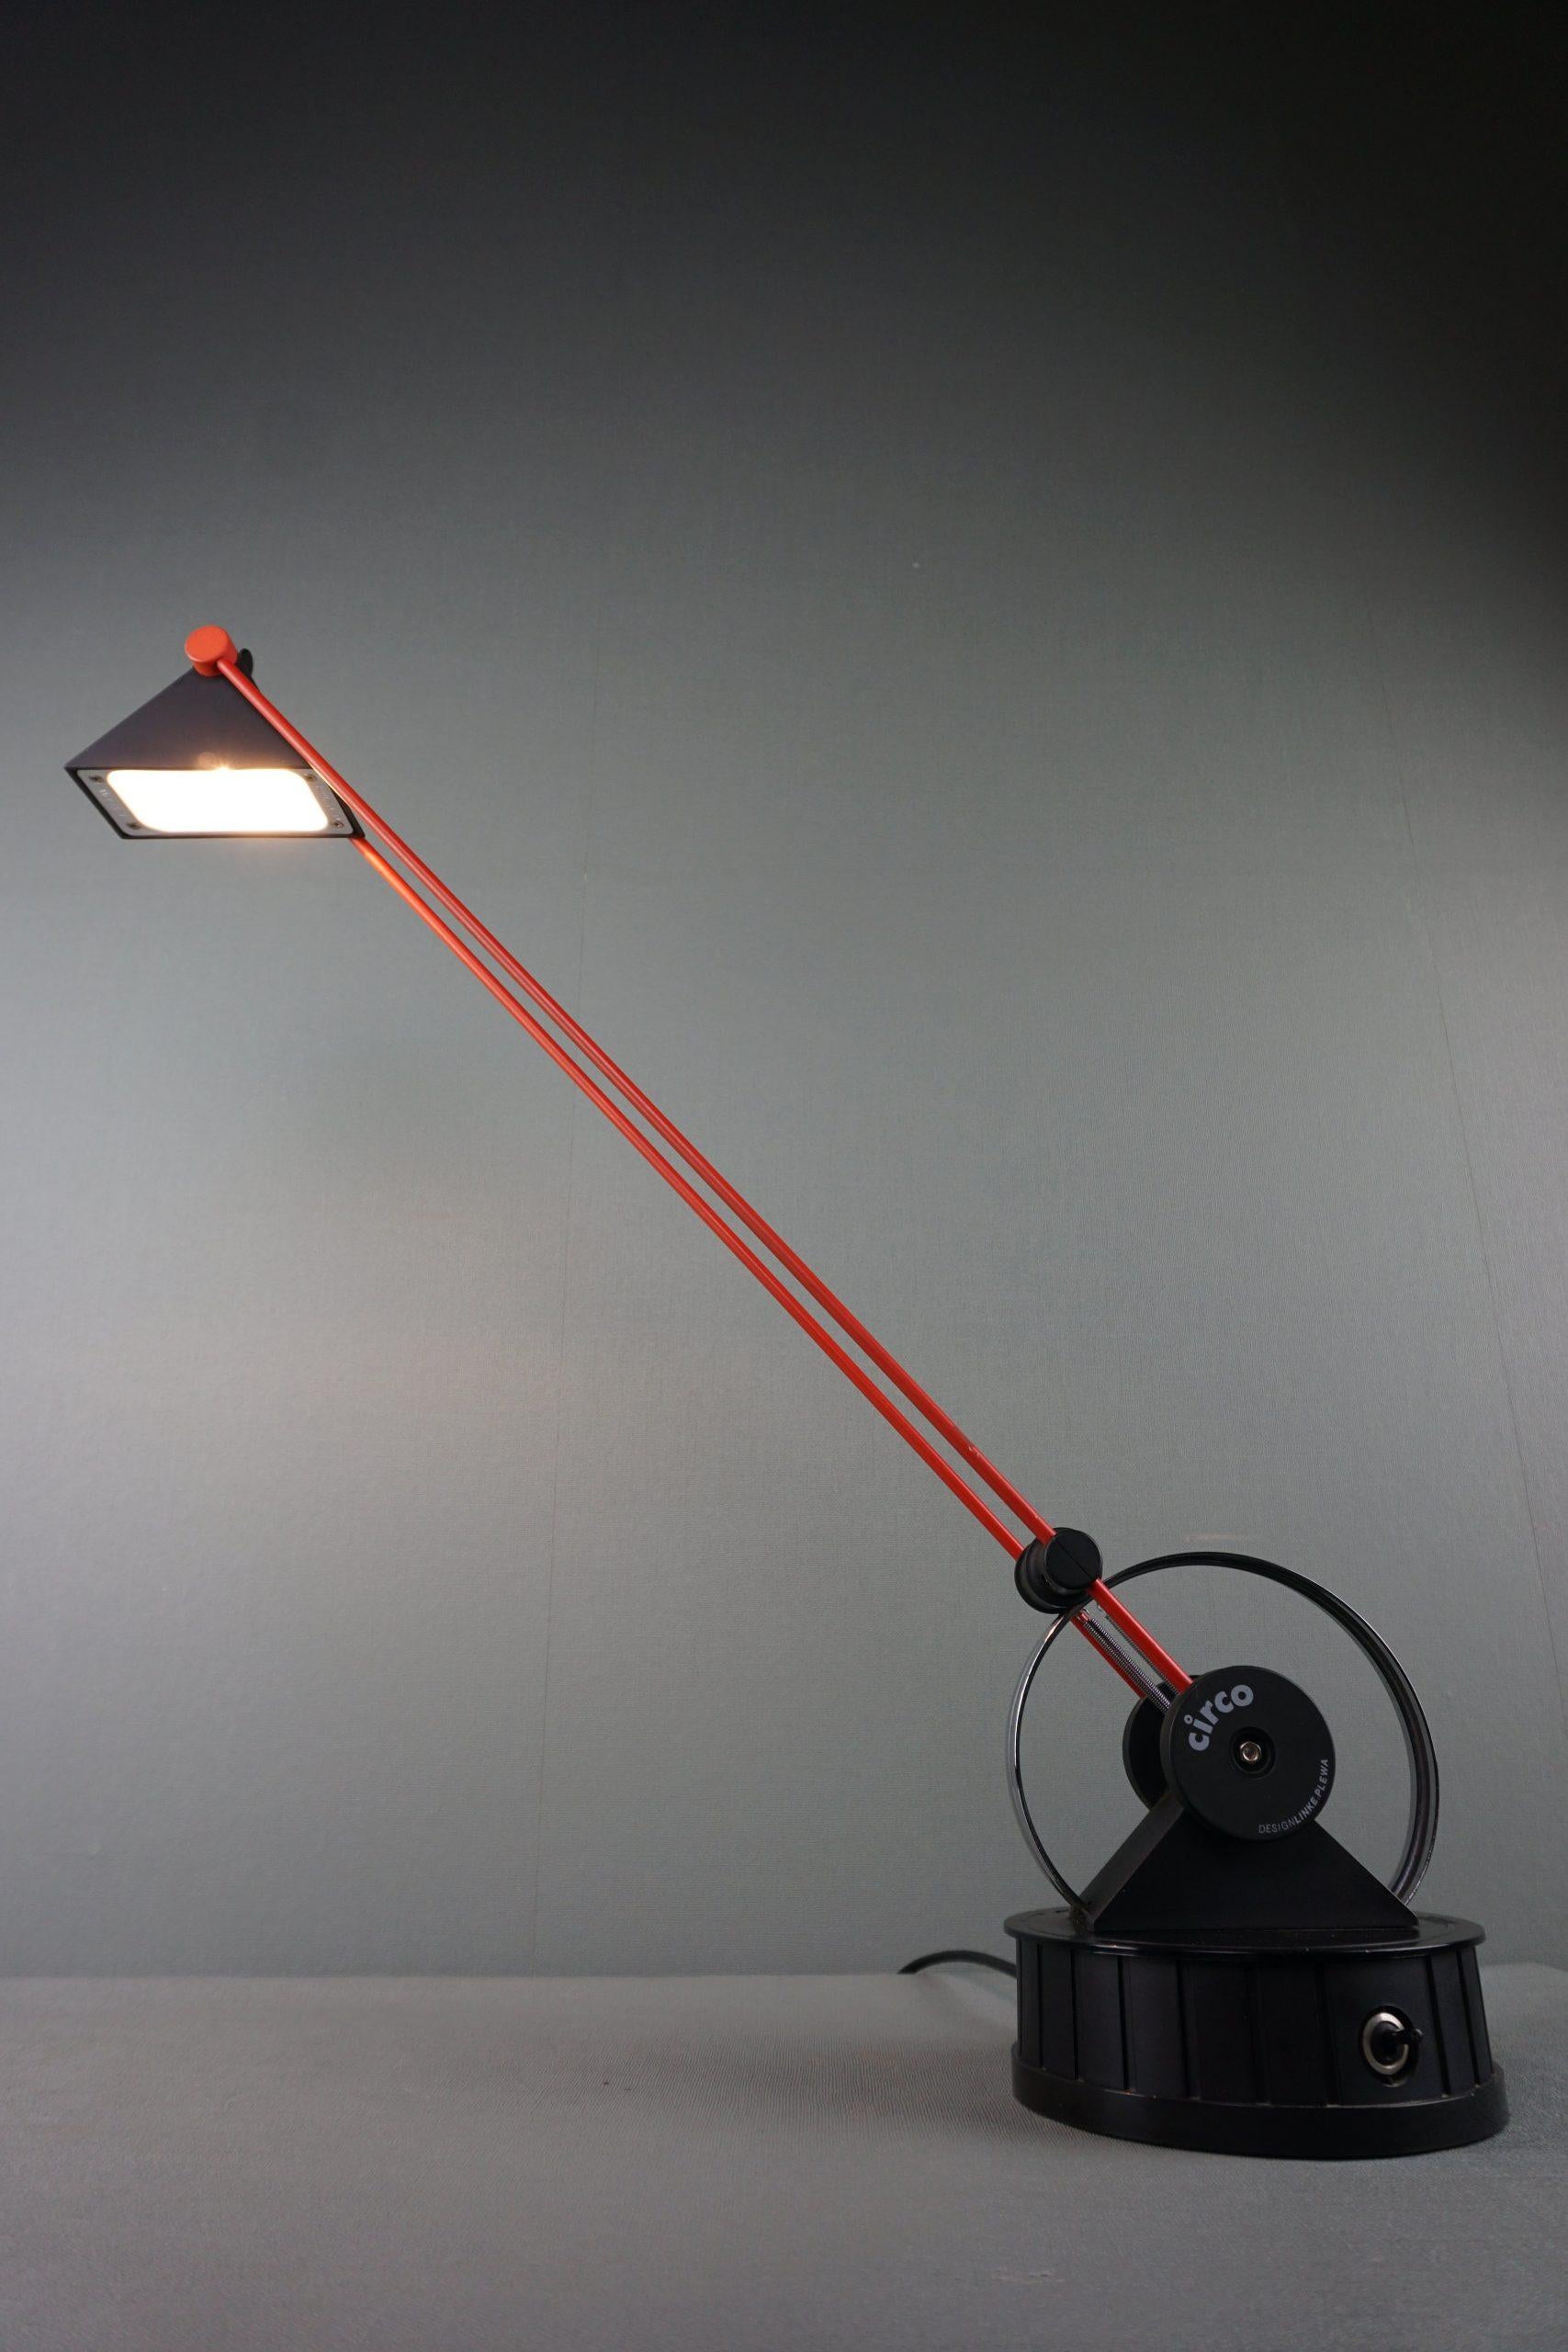 German postmodern desk lamp, designed by Linke Plewa for Briljant Leuchten in the 1980s.

This desk lamp is made of red plastic-covered metal, black painted aluminum, chrome-plated metal and black plastic.
The lamp has a rotating base and shade and